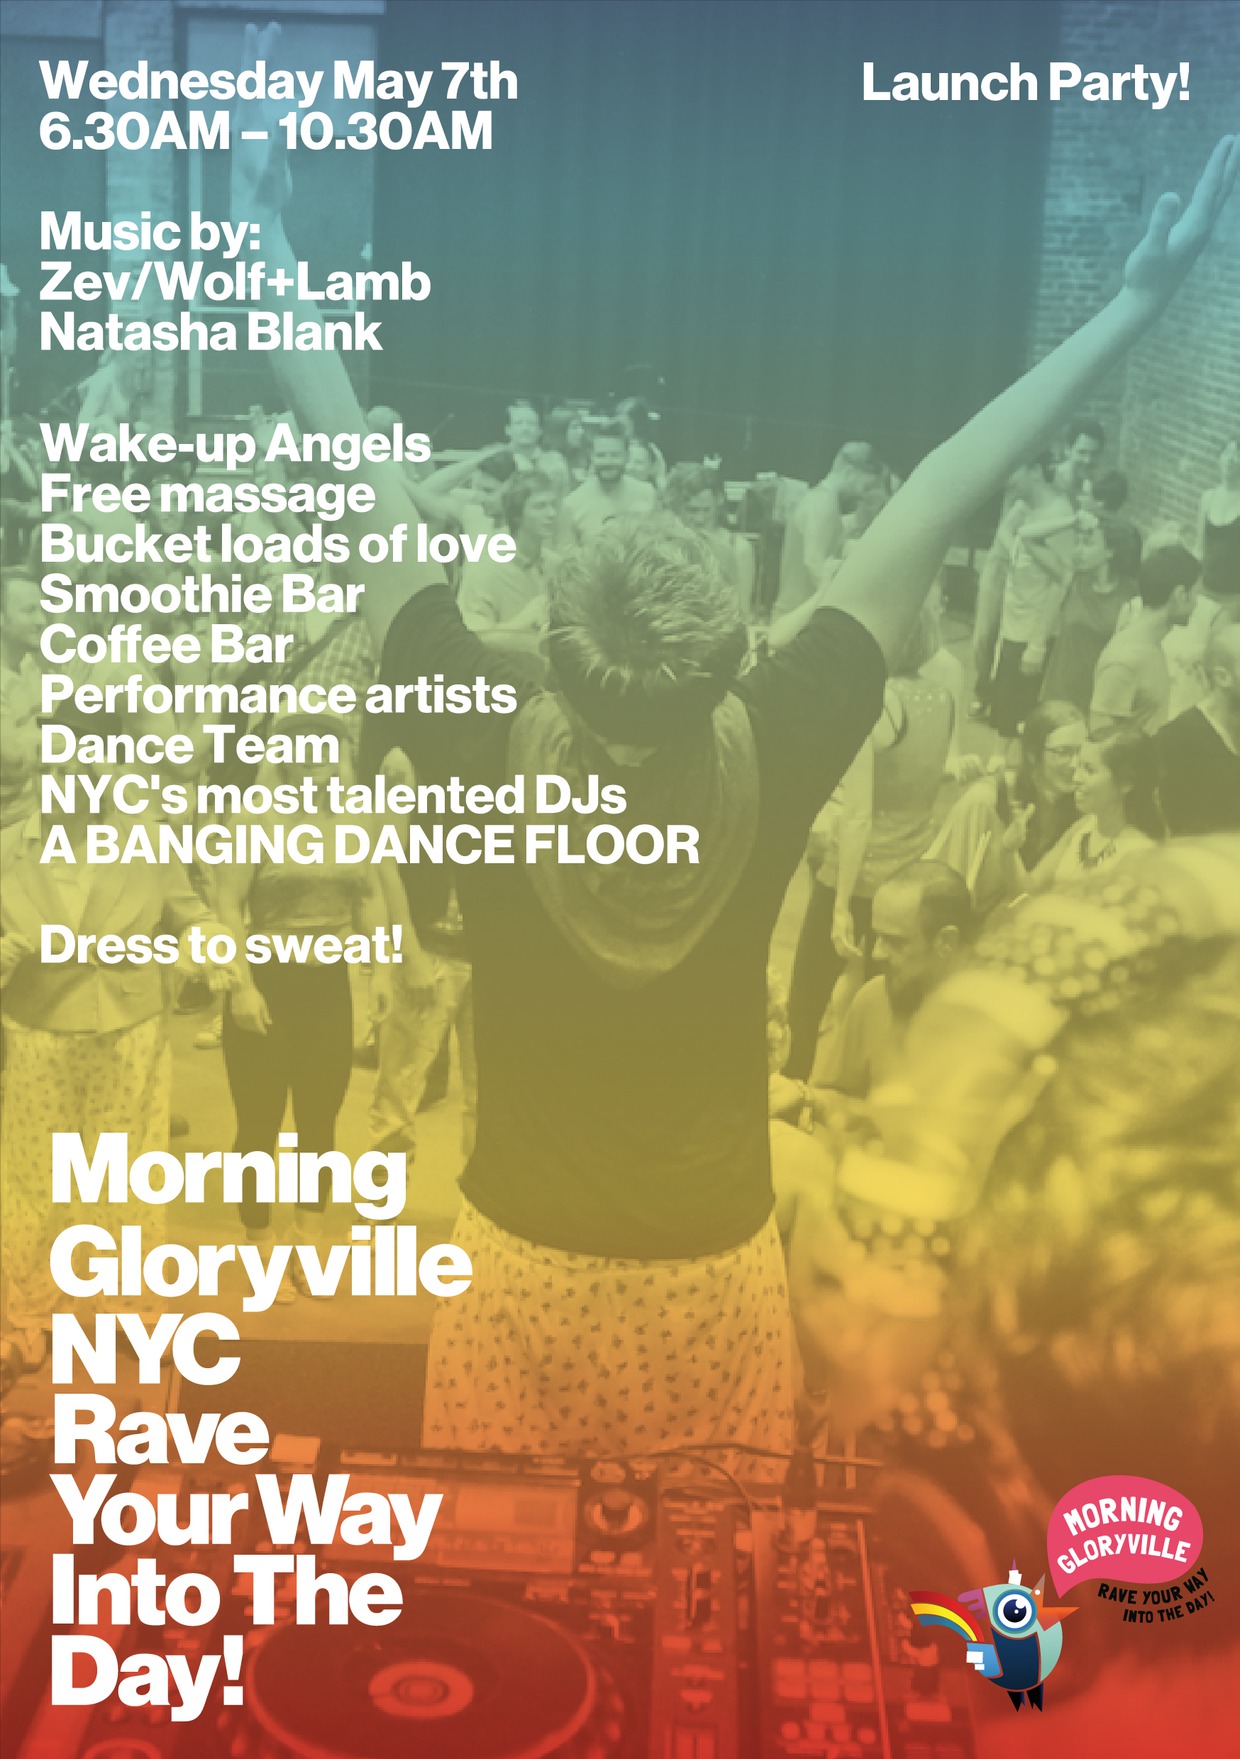 Rave Your Way into the Day: Morning Gloryville this Wednesday AM!